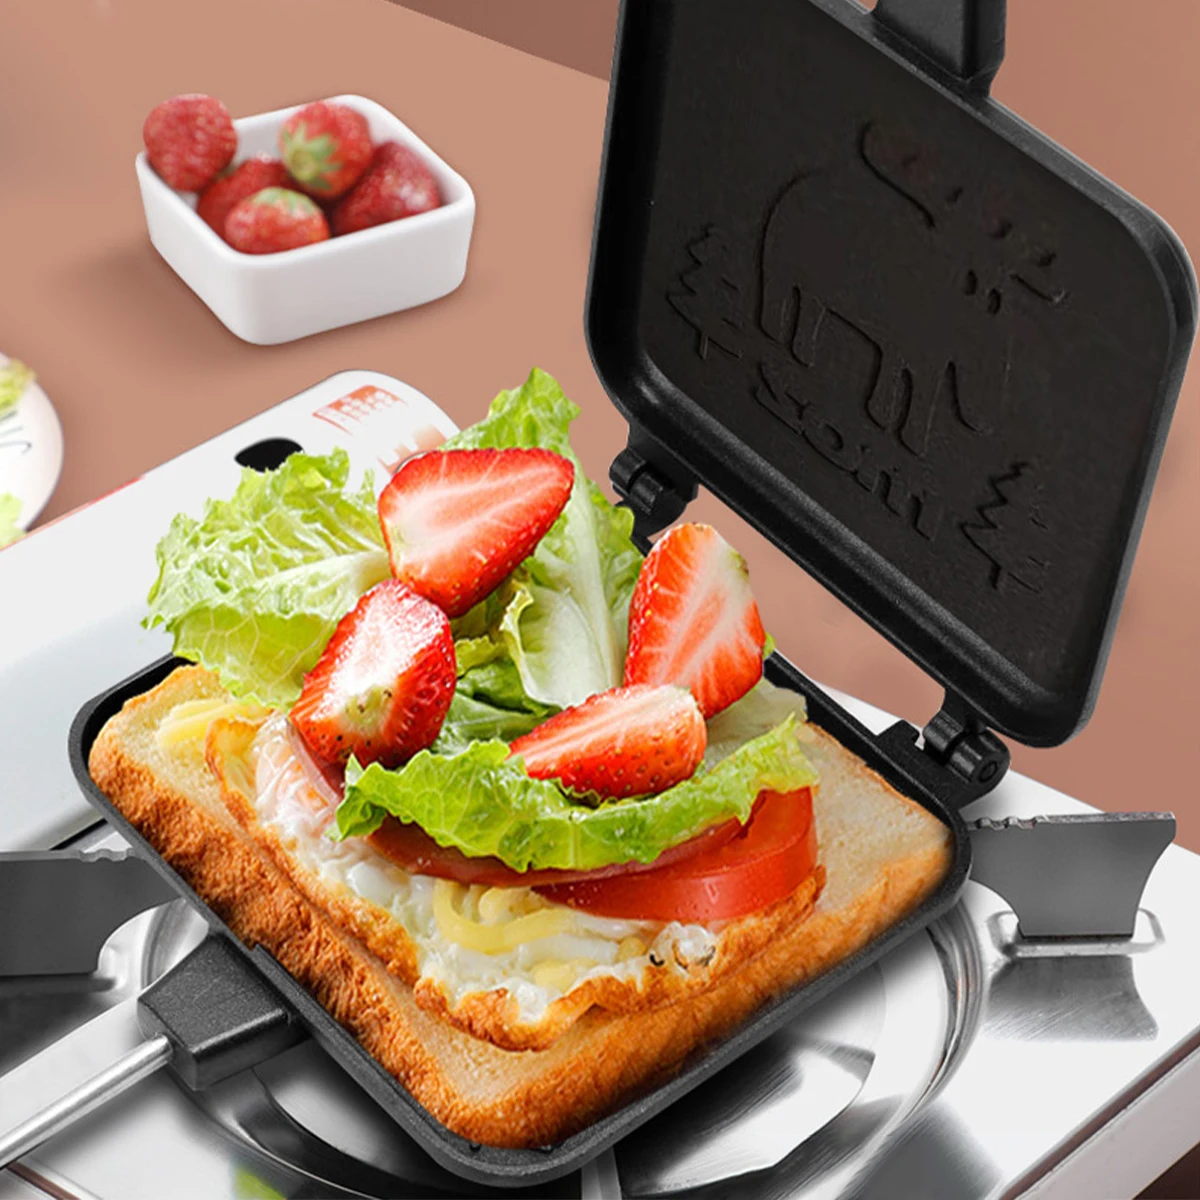 https://ae01.alicdn.com/kf/S452e8d4d75e24b1b9cfd06694abd6fcfY/Toasted-Sandwich-Maker-with-Wooden-Handle-Double-Sided-Sandwich-Grill-Pan-Non-Stick-Stovetop-Toaster-Portable.jpg